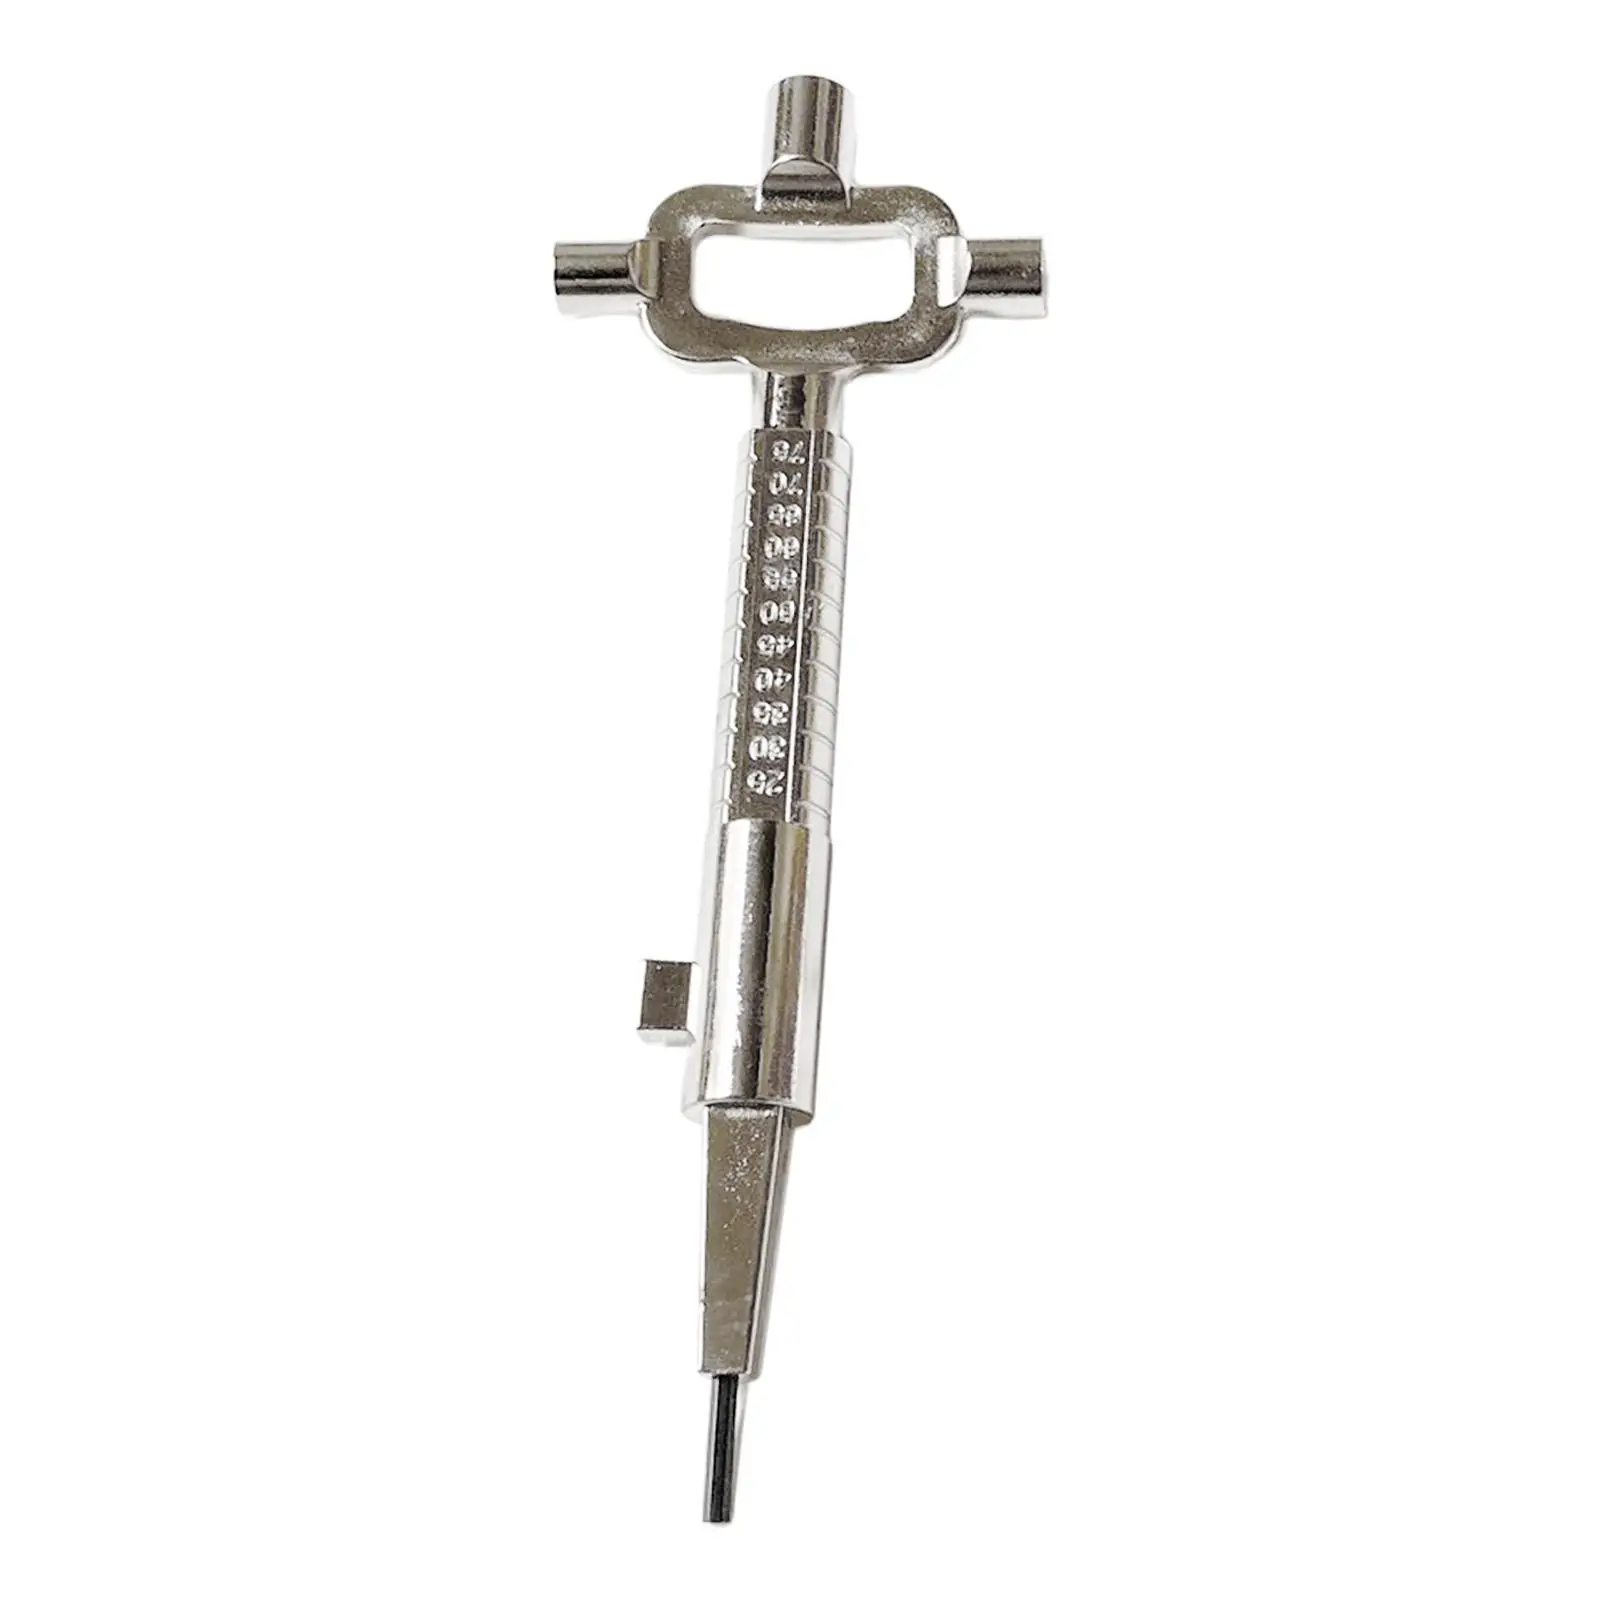 

Cylinder Measuring Key Cylinder Gage Spindle and cam Operater Wrench Polished Repair Bottle Opener Lock body squares Rod